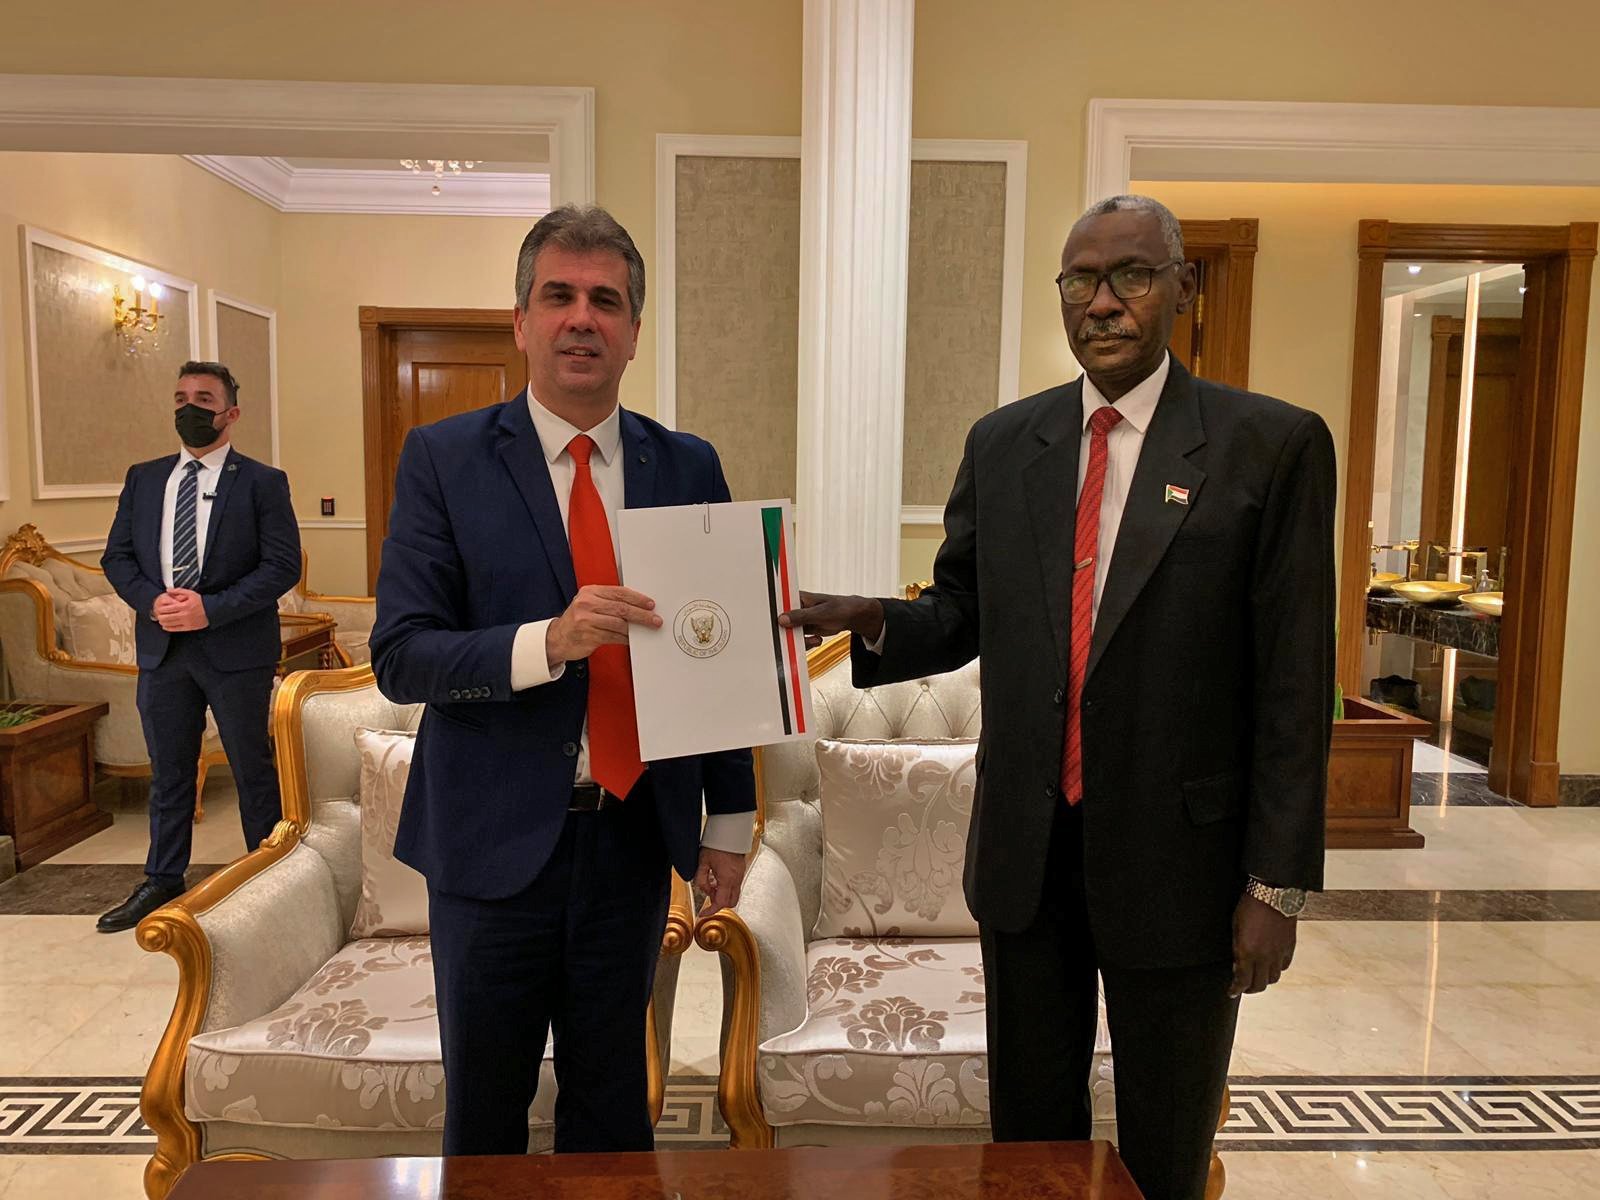 A handout picture released by the Israeli Intelligence Ministry shows Israeli Intelligence Minister Eli Cohen (L) exchanging a document with Sudanese Defense Minister Yassin Ibrahim during their meeting in Sudan's capital Khartoum on Jan. 25, 2021. (Photo by Arye SHALICAR / Israel Intelligence Ministry / AFP)